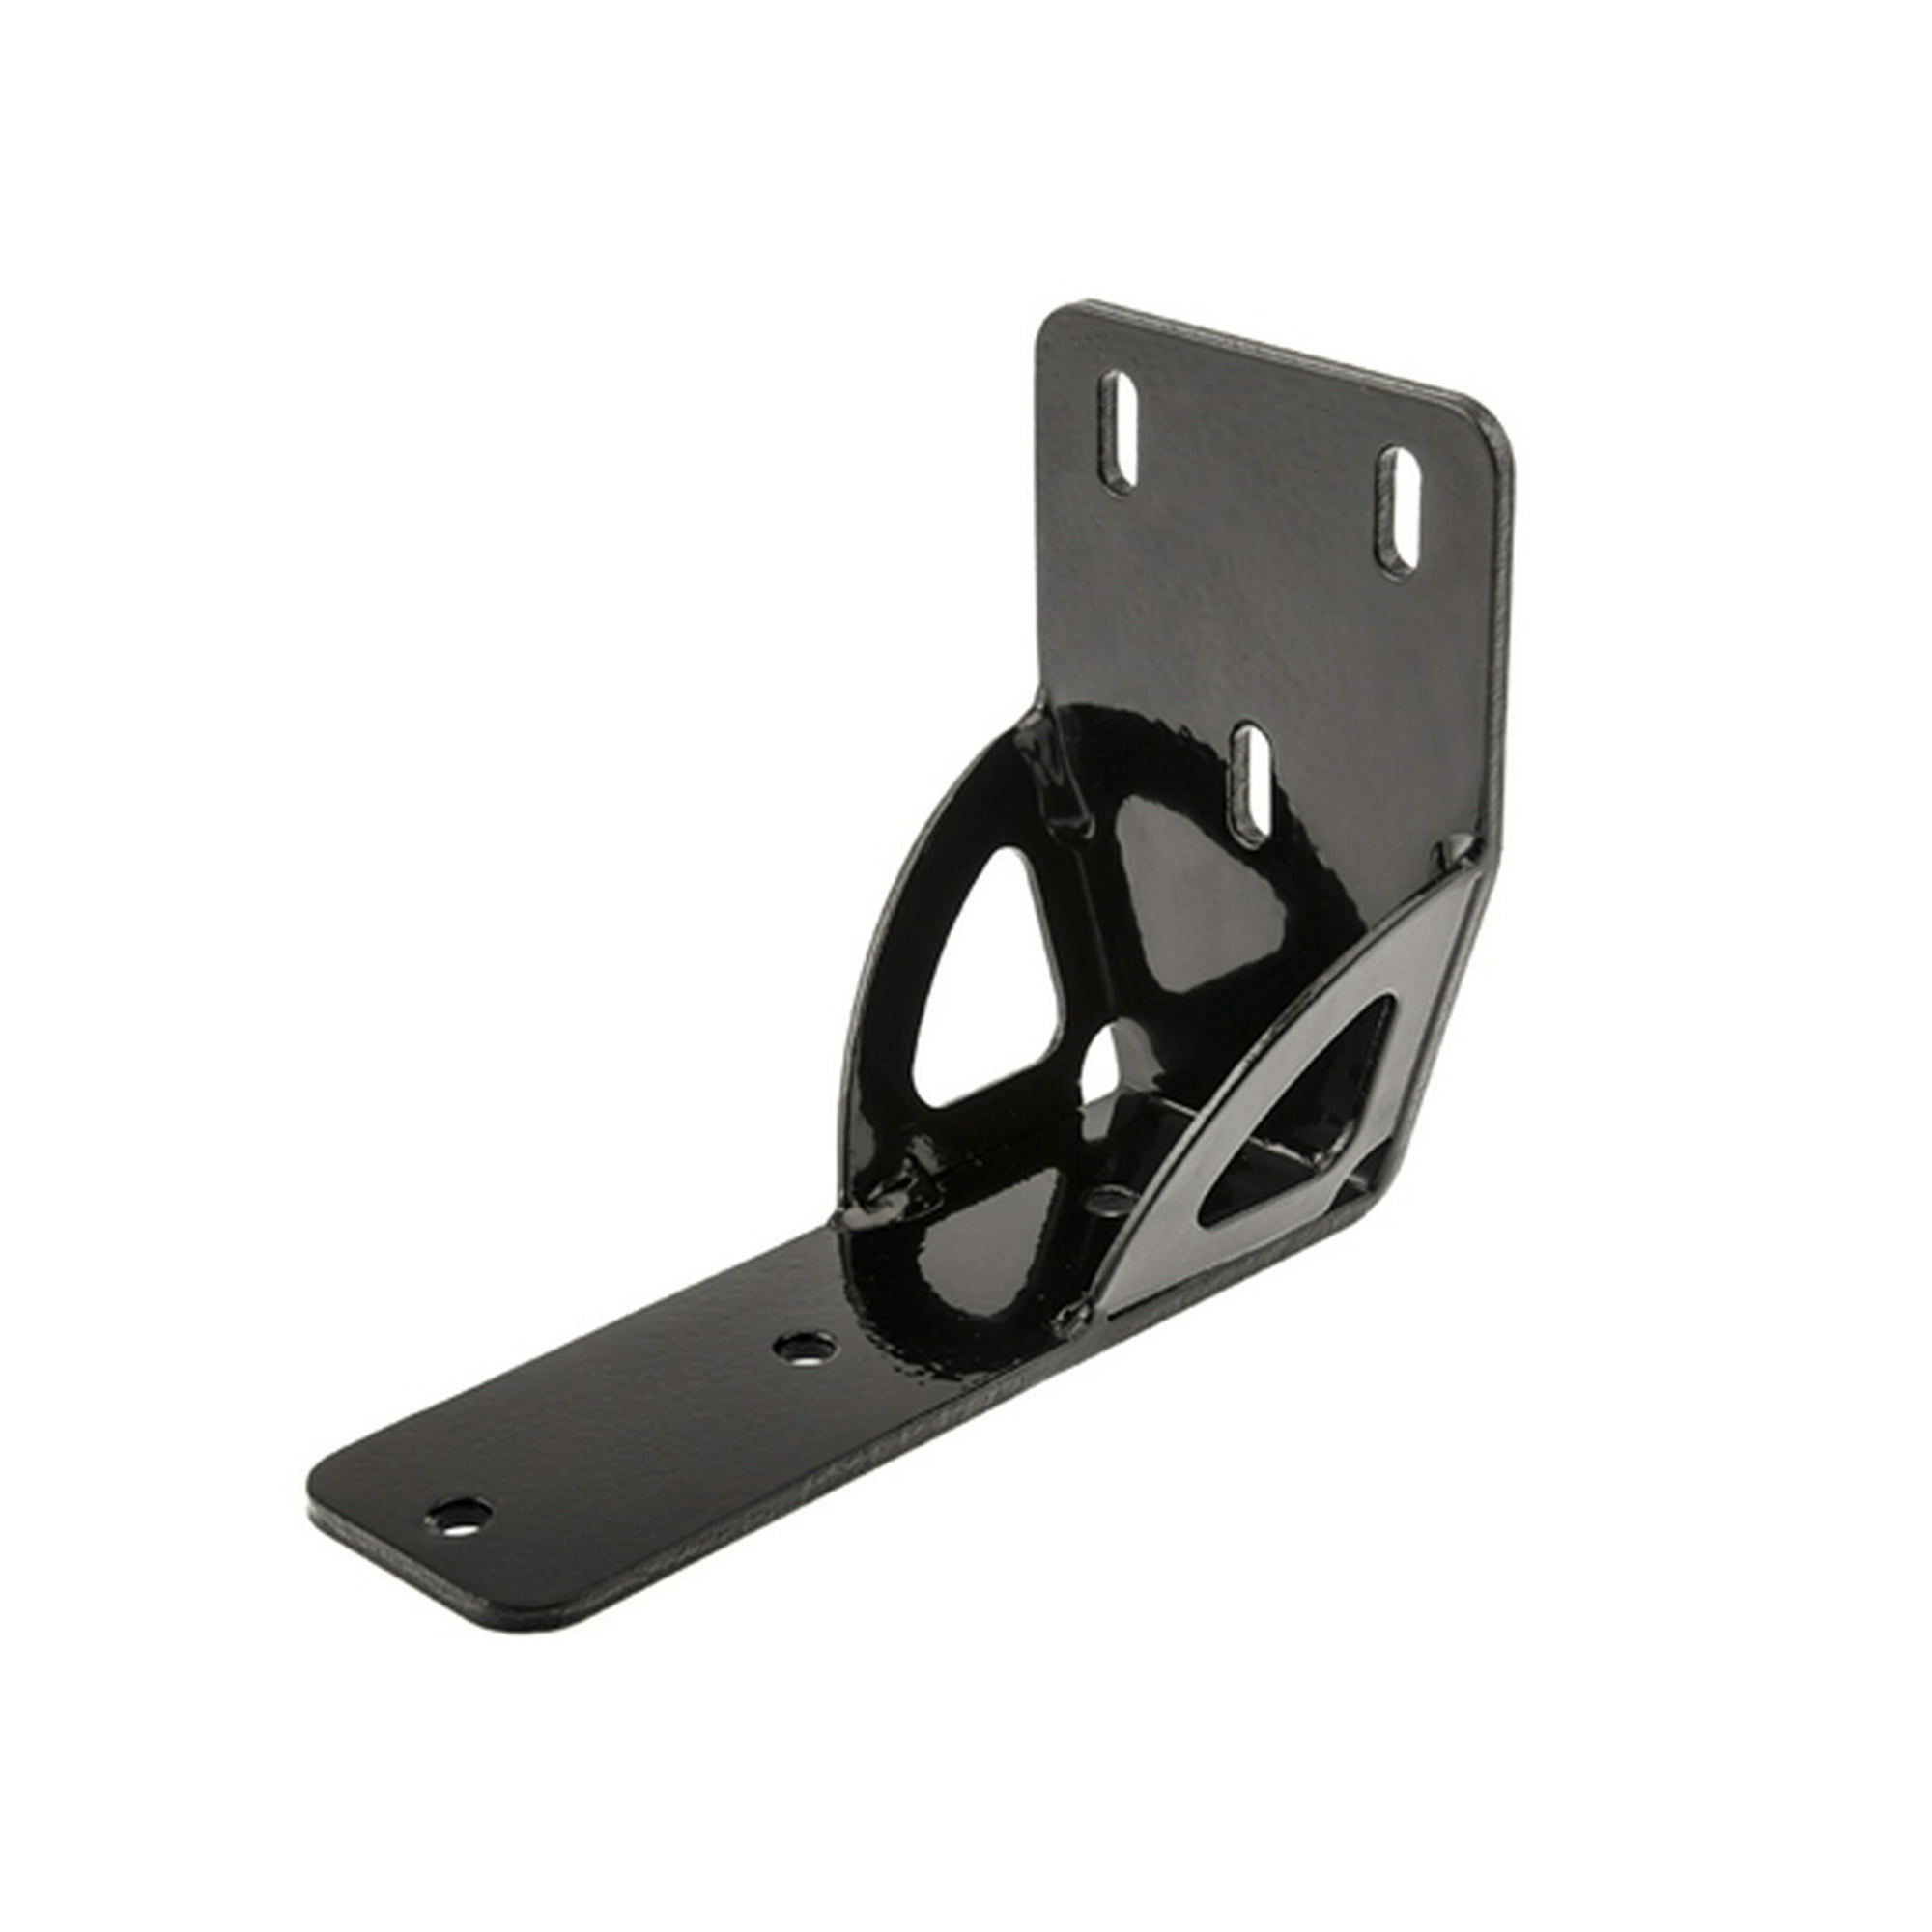 Arb Usa 813402 Awning Bracket For Use When Mounting Arb Awnings To Roof Racks For Additional Support Black Walmart Canada